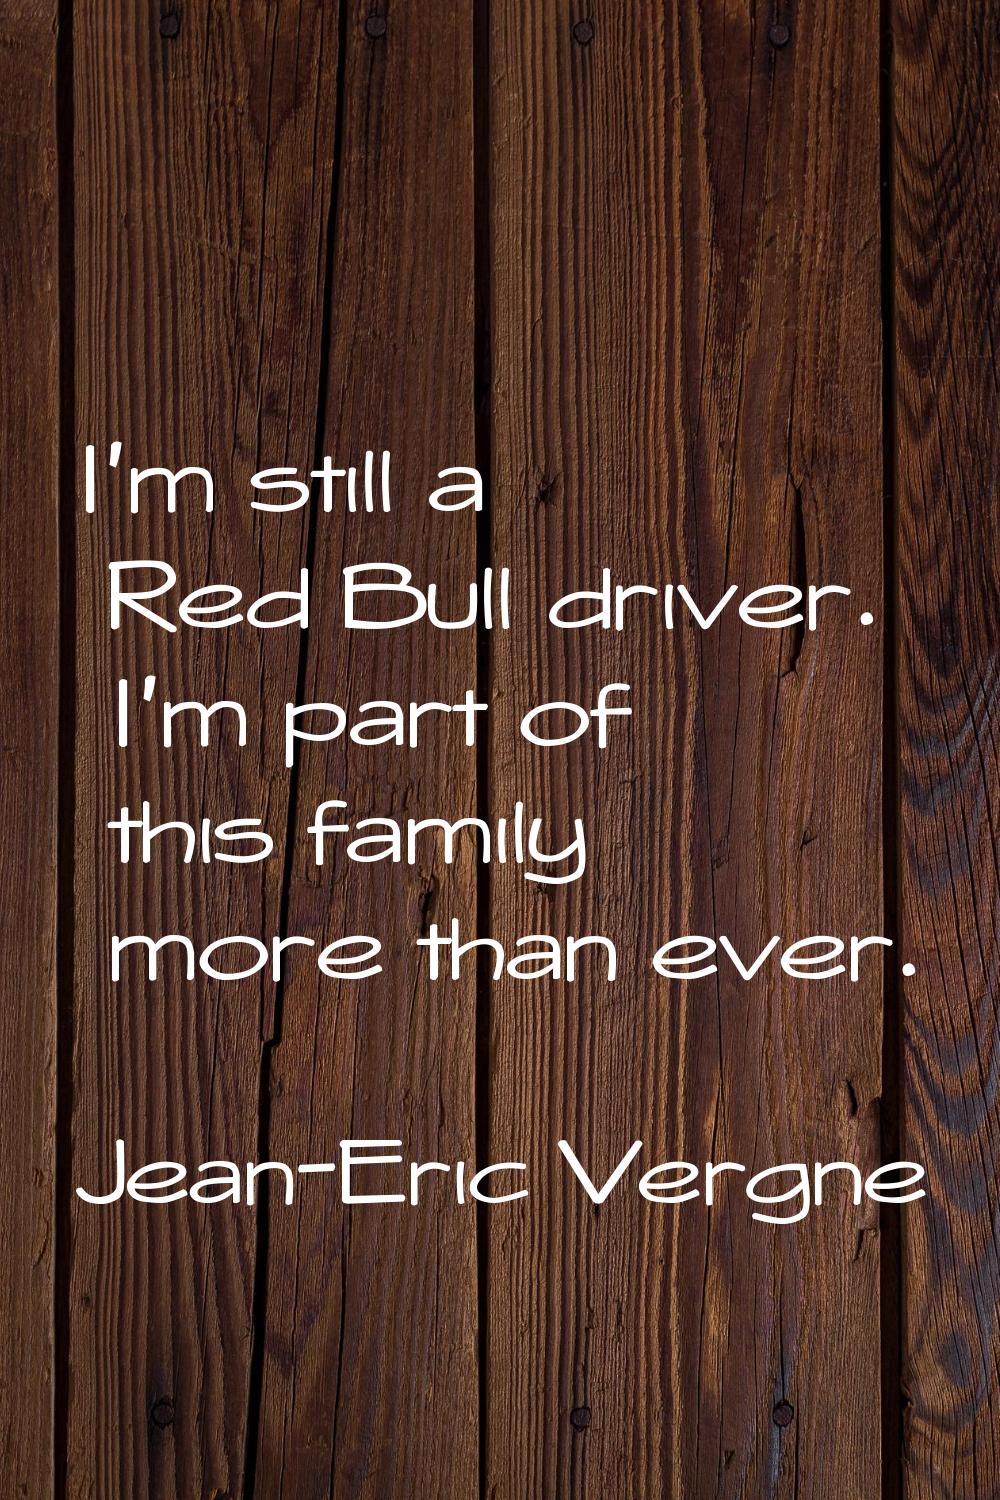 I'm still a Red Bull driver. I'm part of this family more than ever.